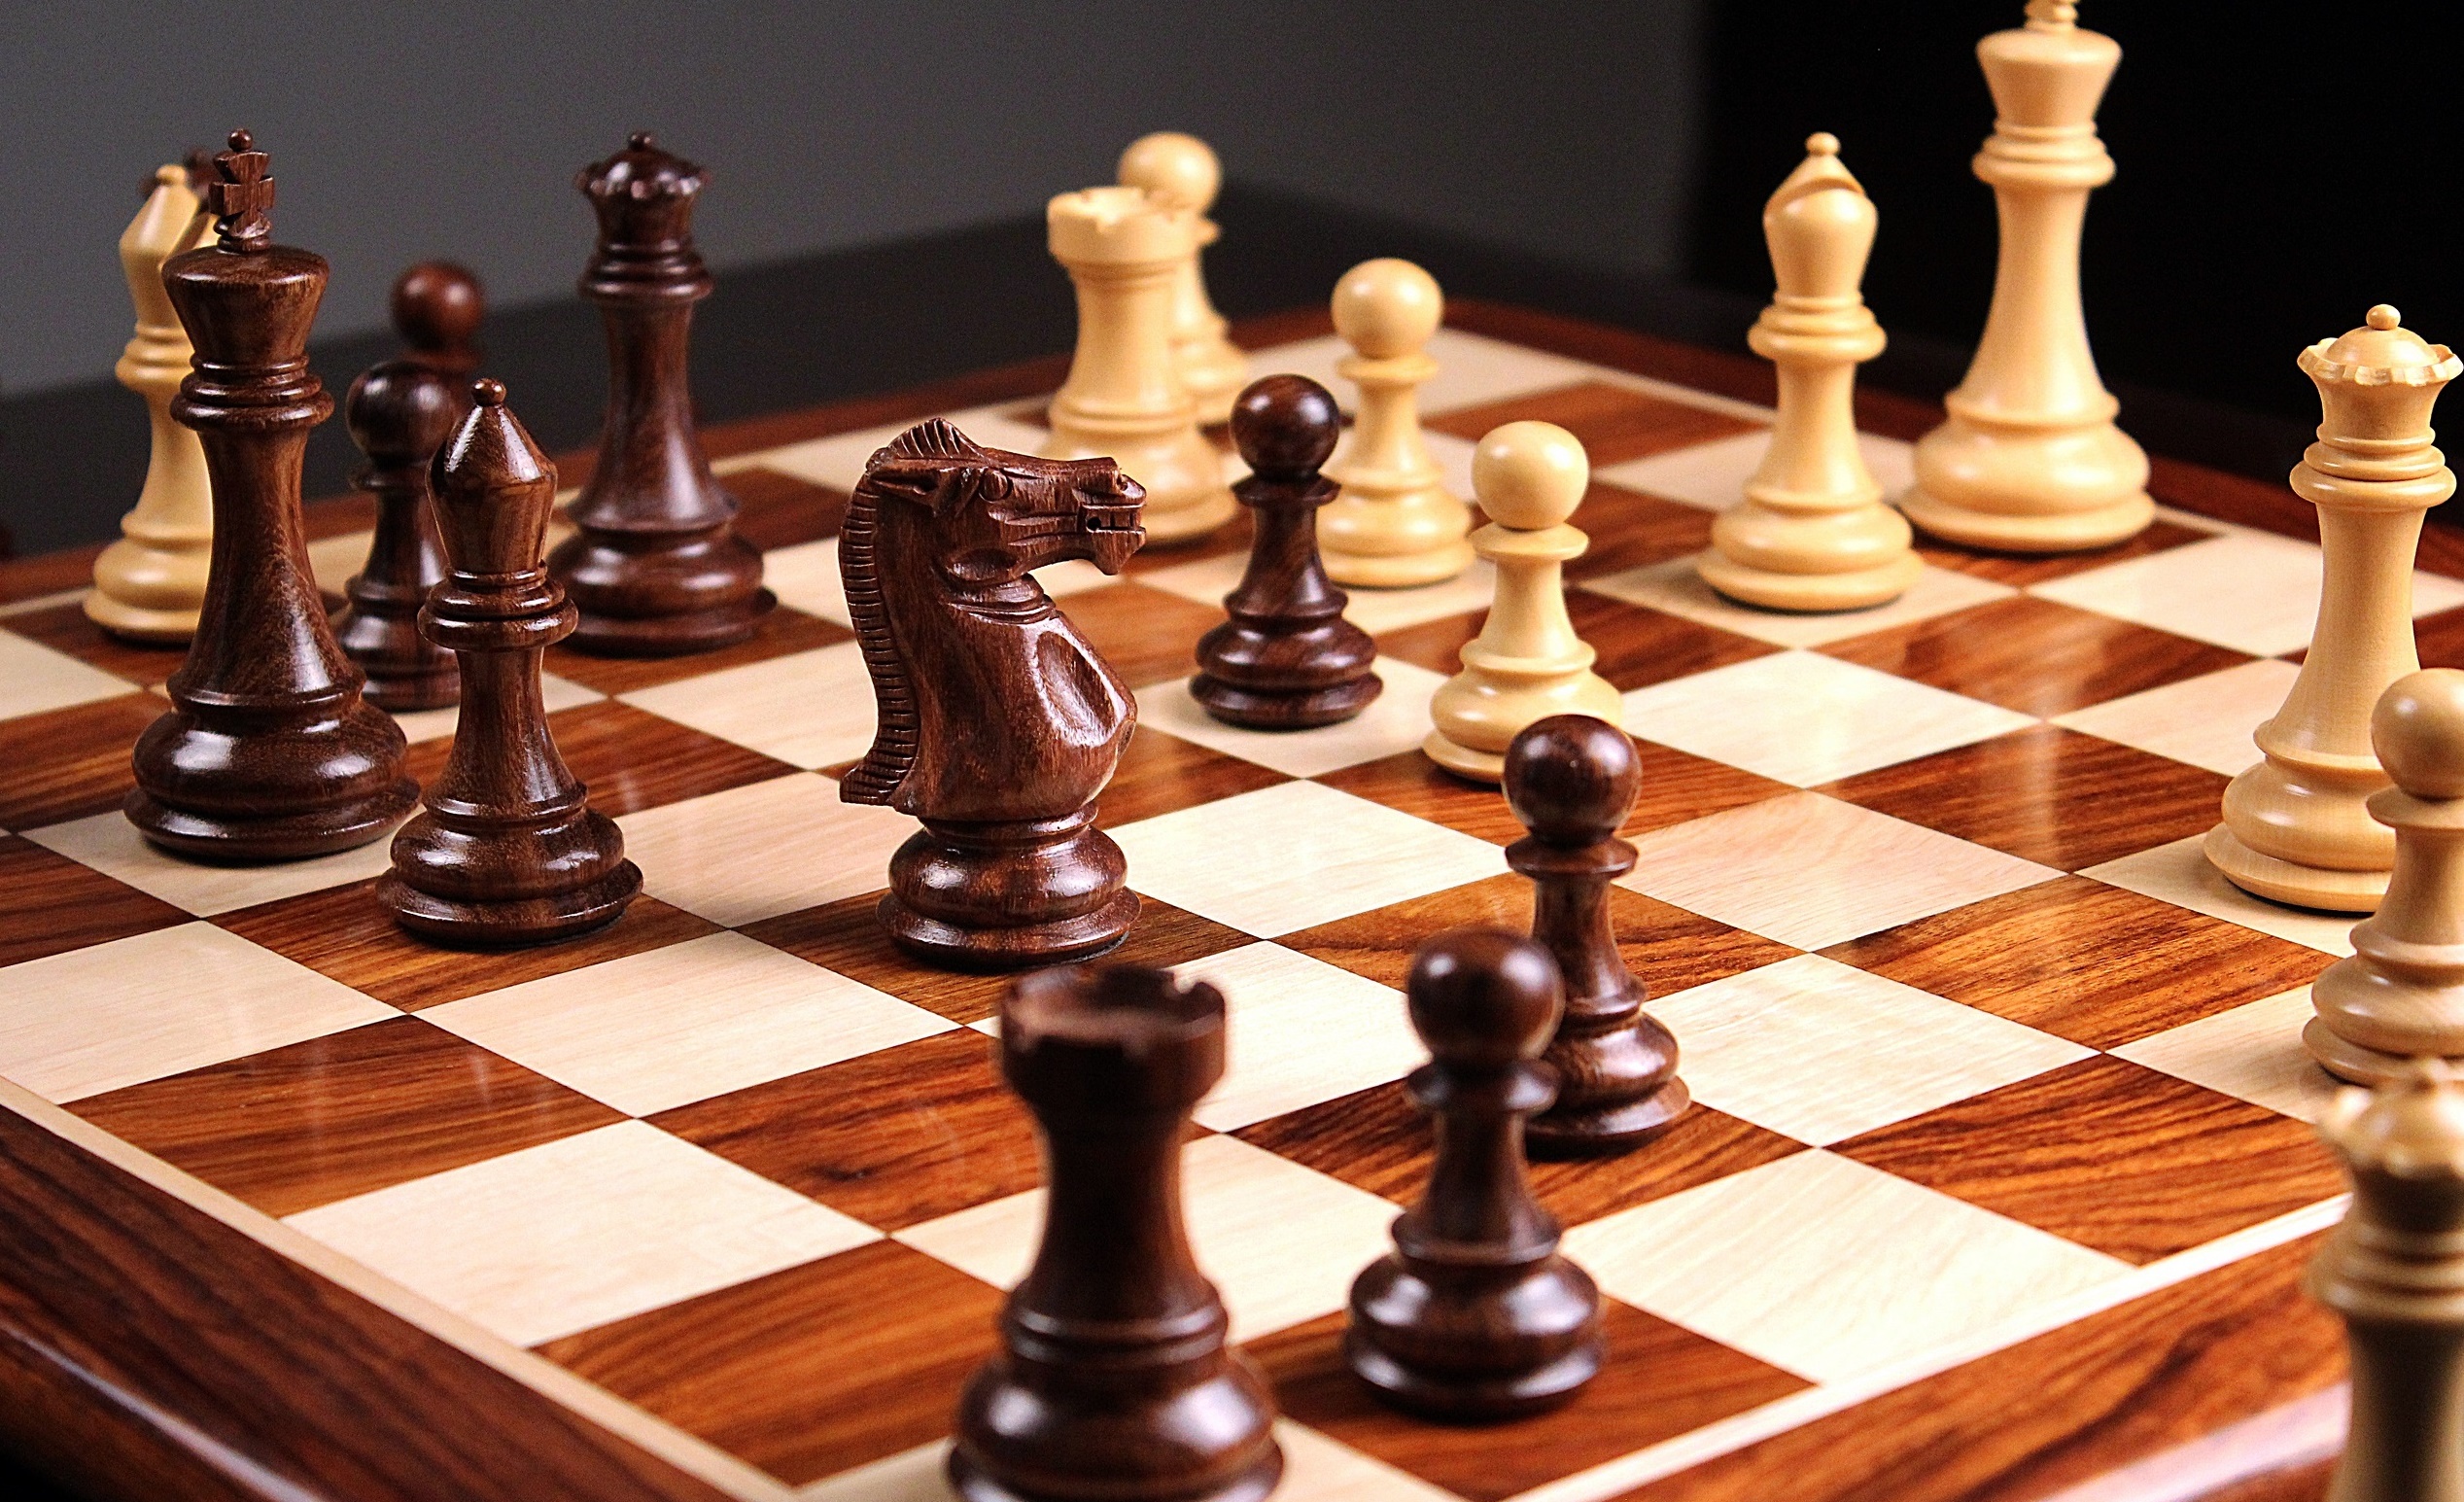 Online chess game